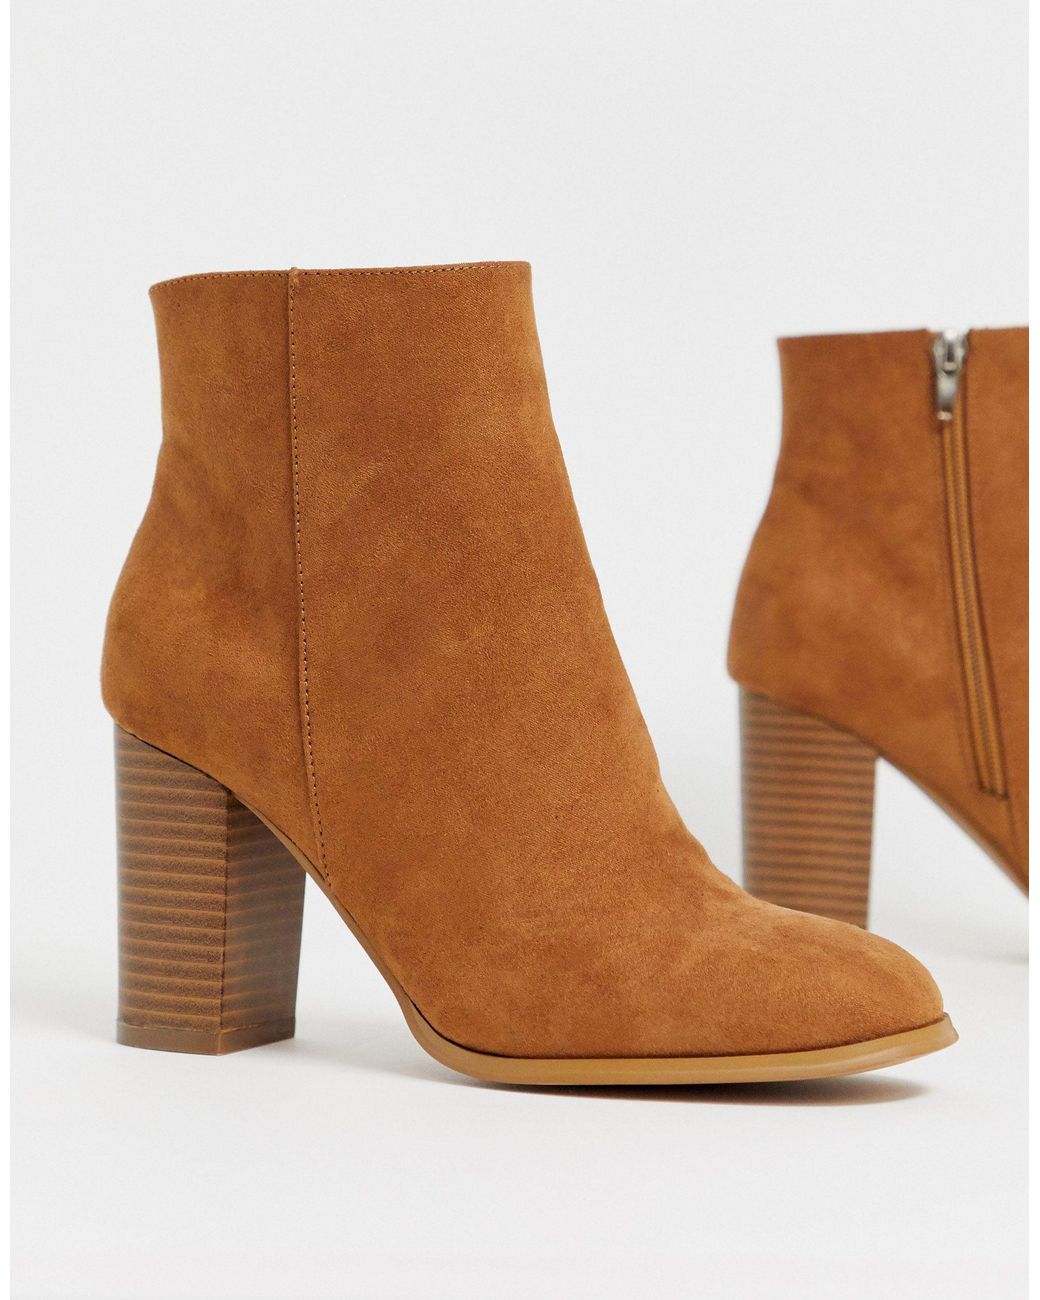 ASOS Rye Heeled Ankle Boots in Brown | Lyst